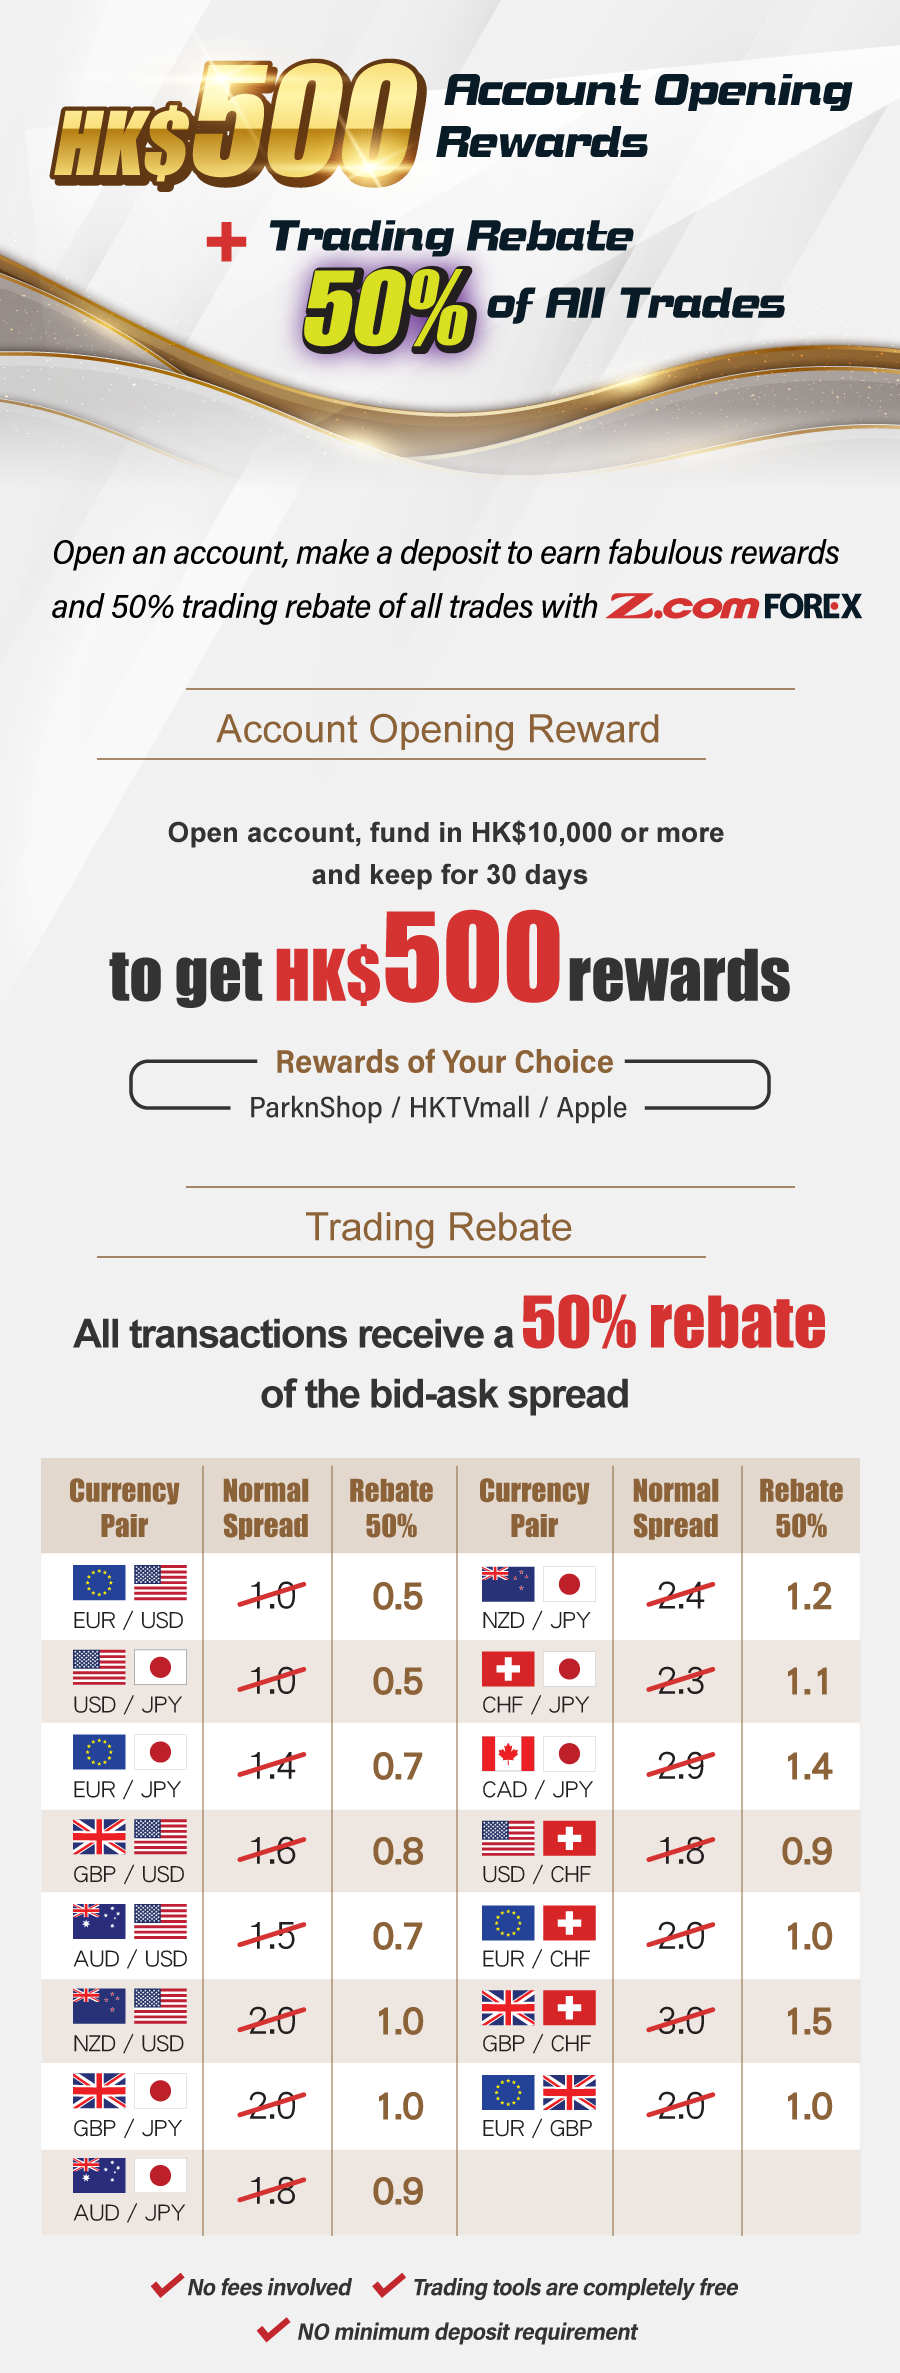 HK$500 Account Opening Rewards + Trading Rebate 50% of All Trades